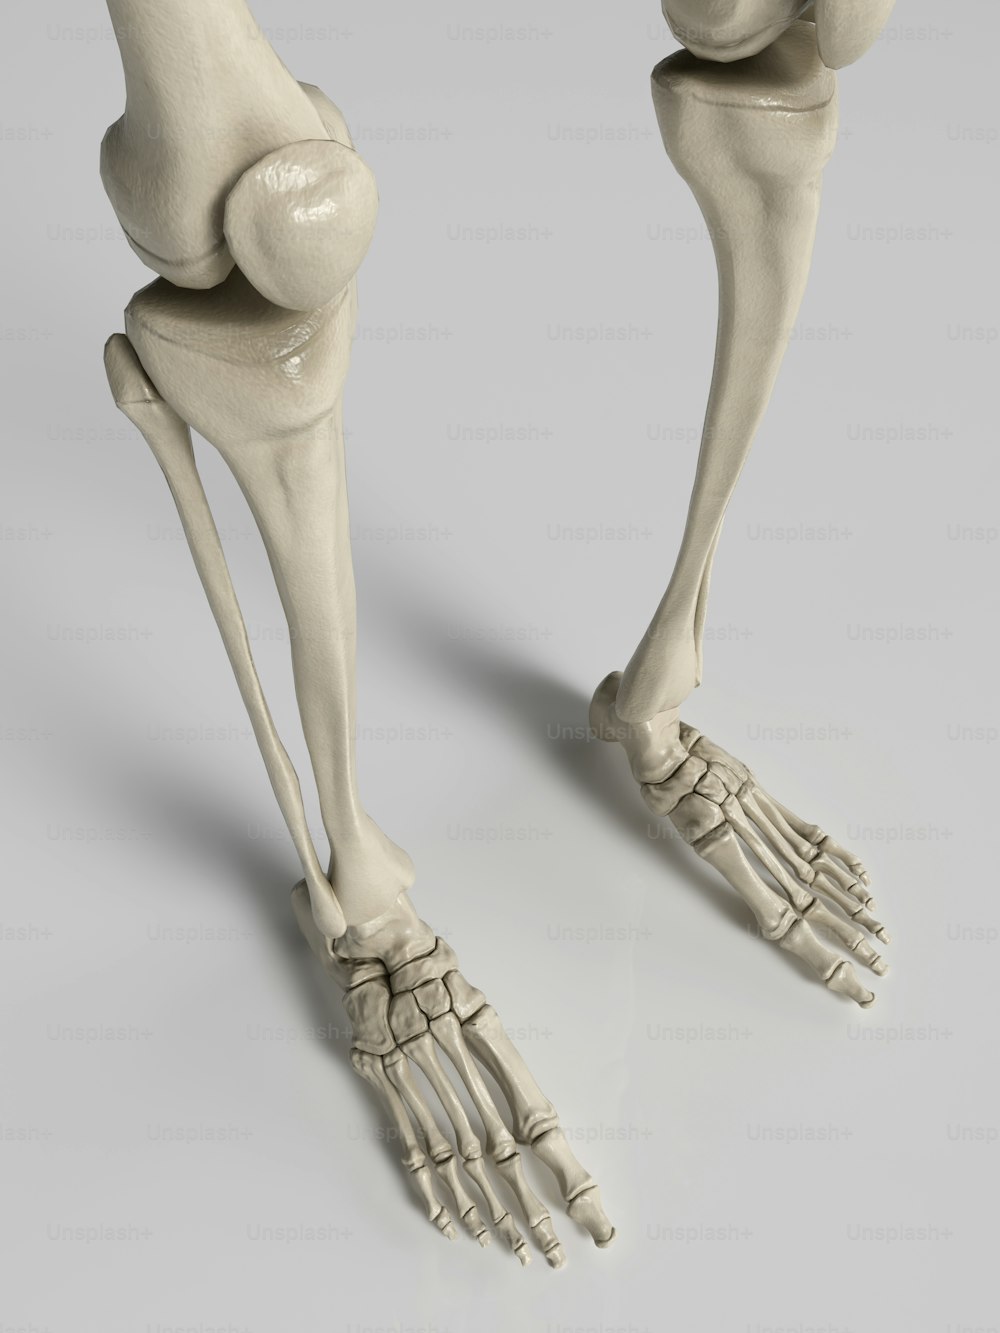 a 3d rendering of a human leg and foot